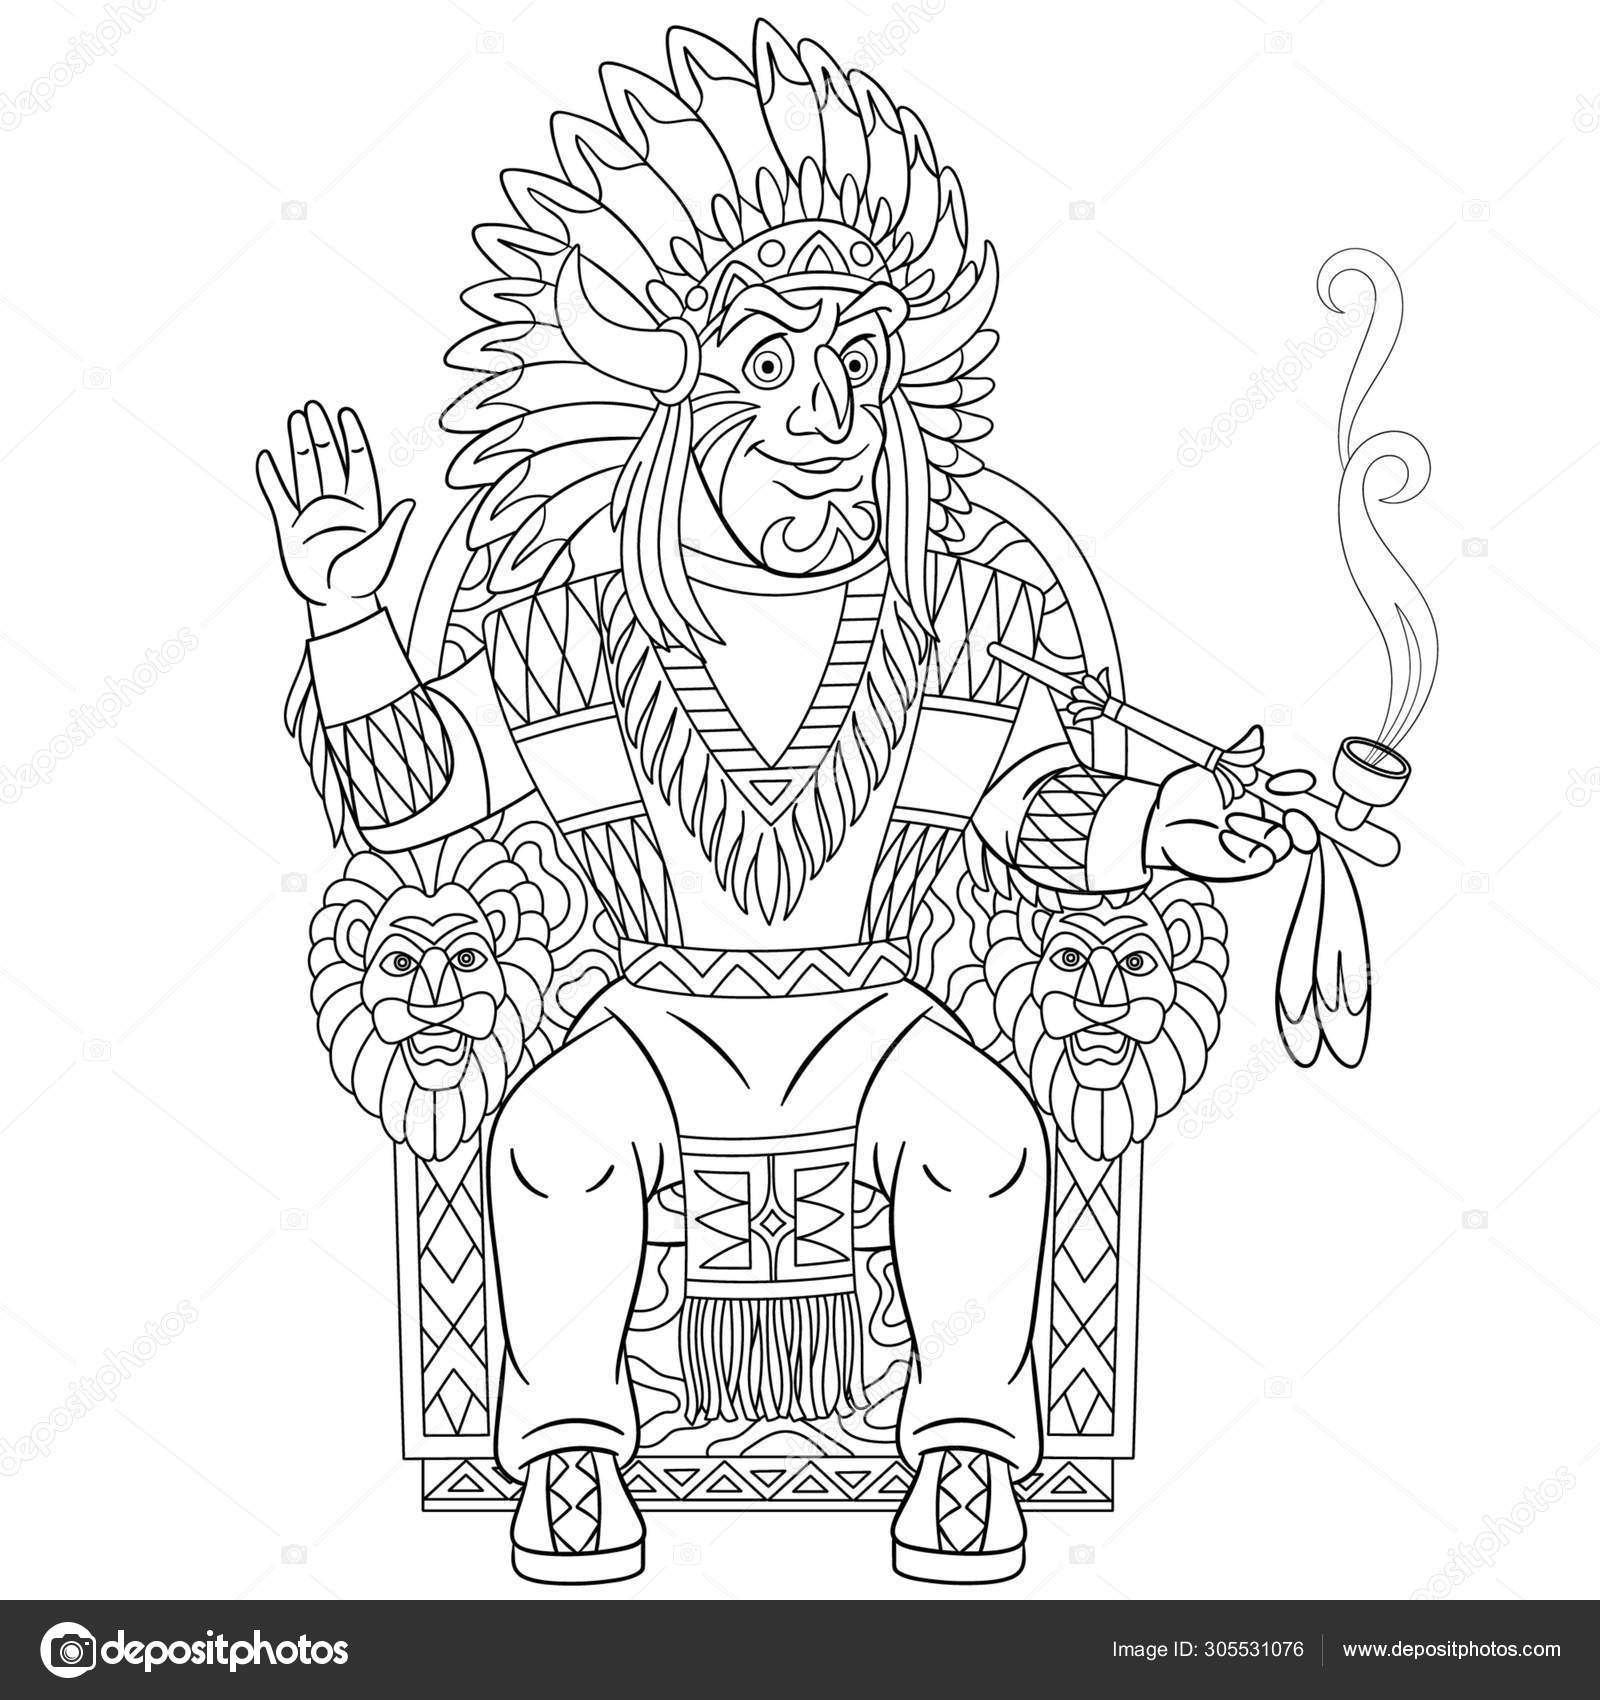 Coloring page with native american indian chief stock vector by sybirko